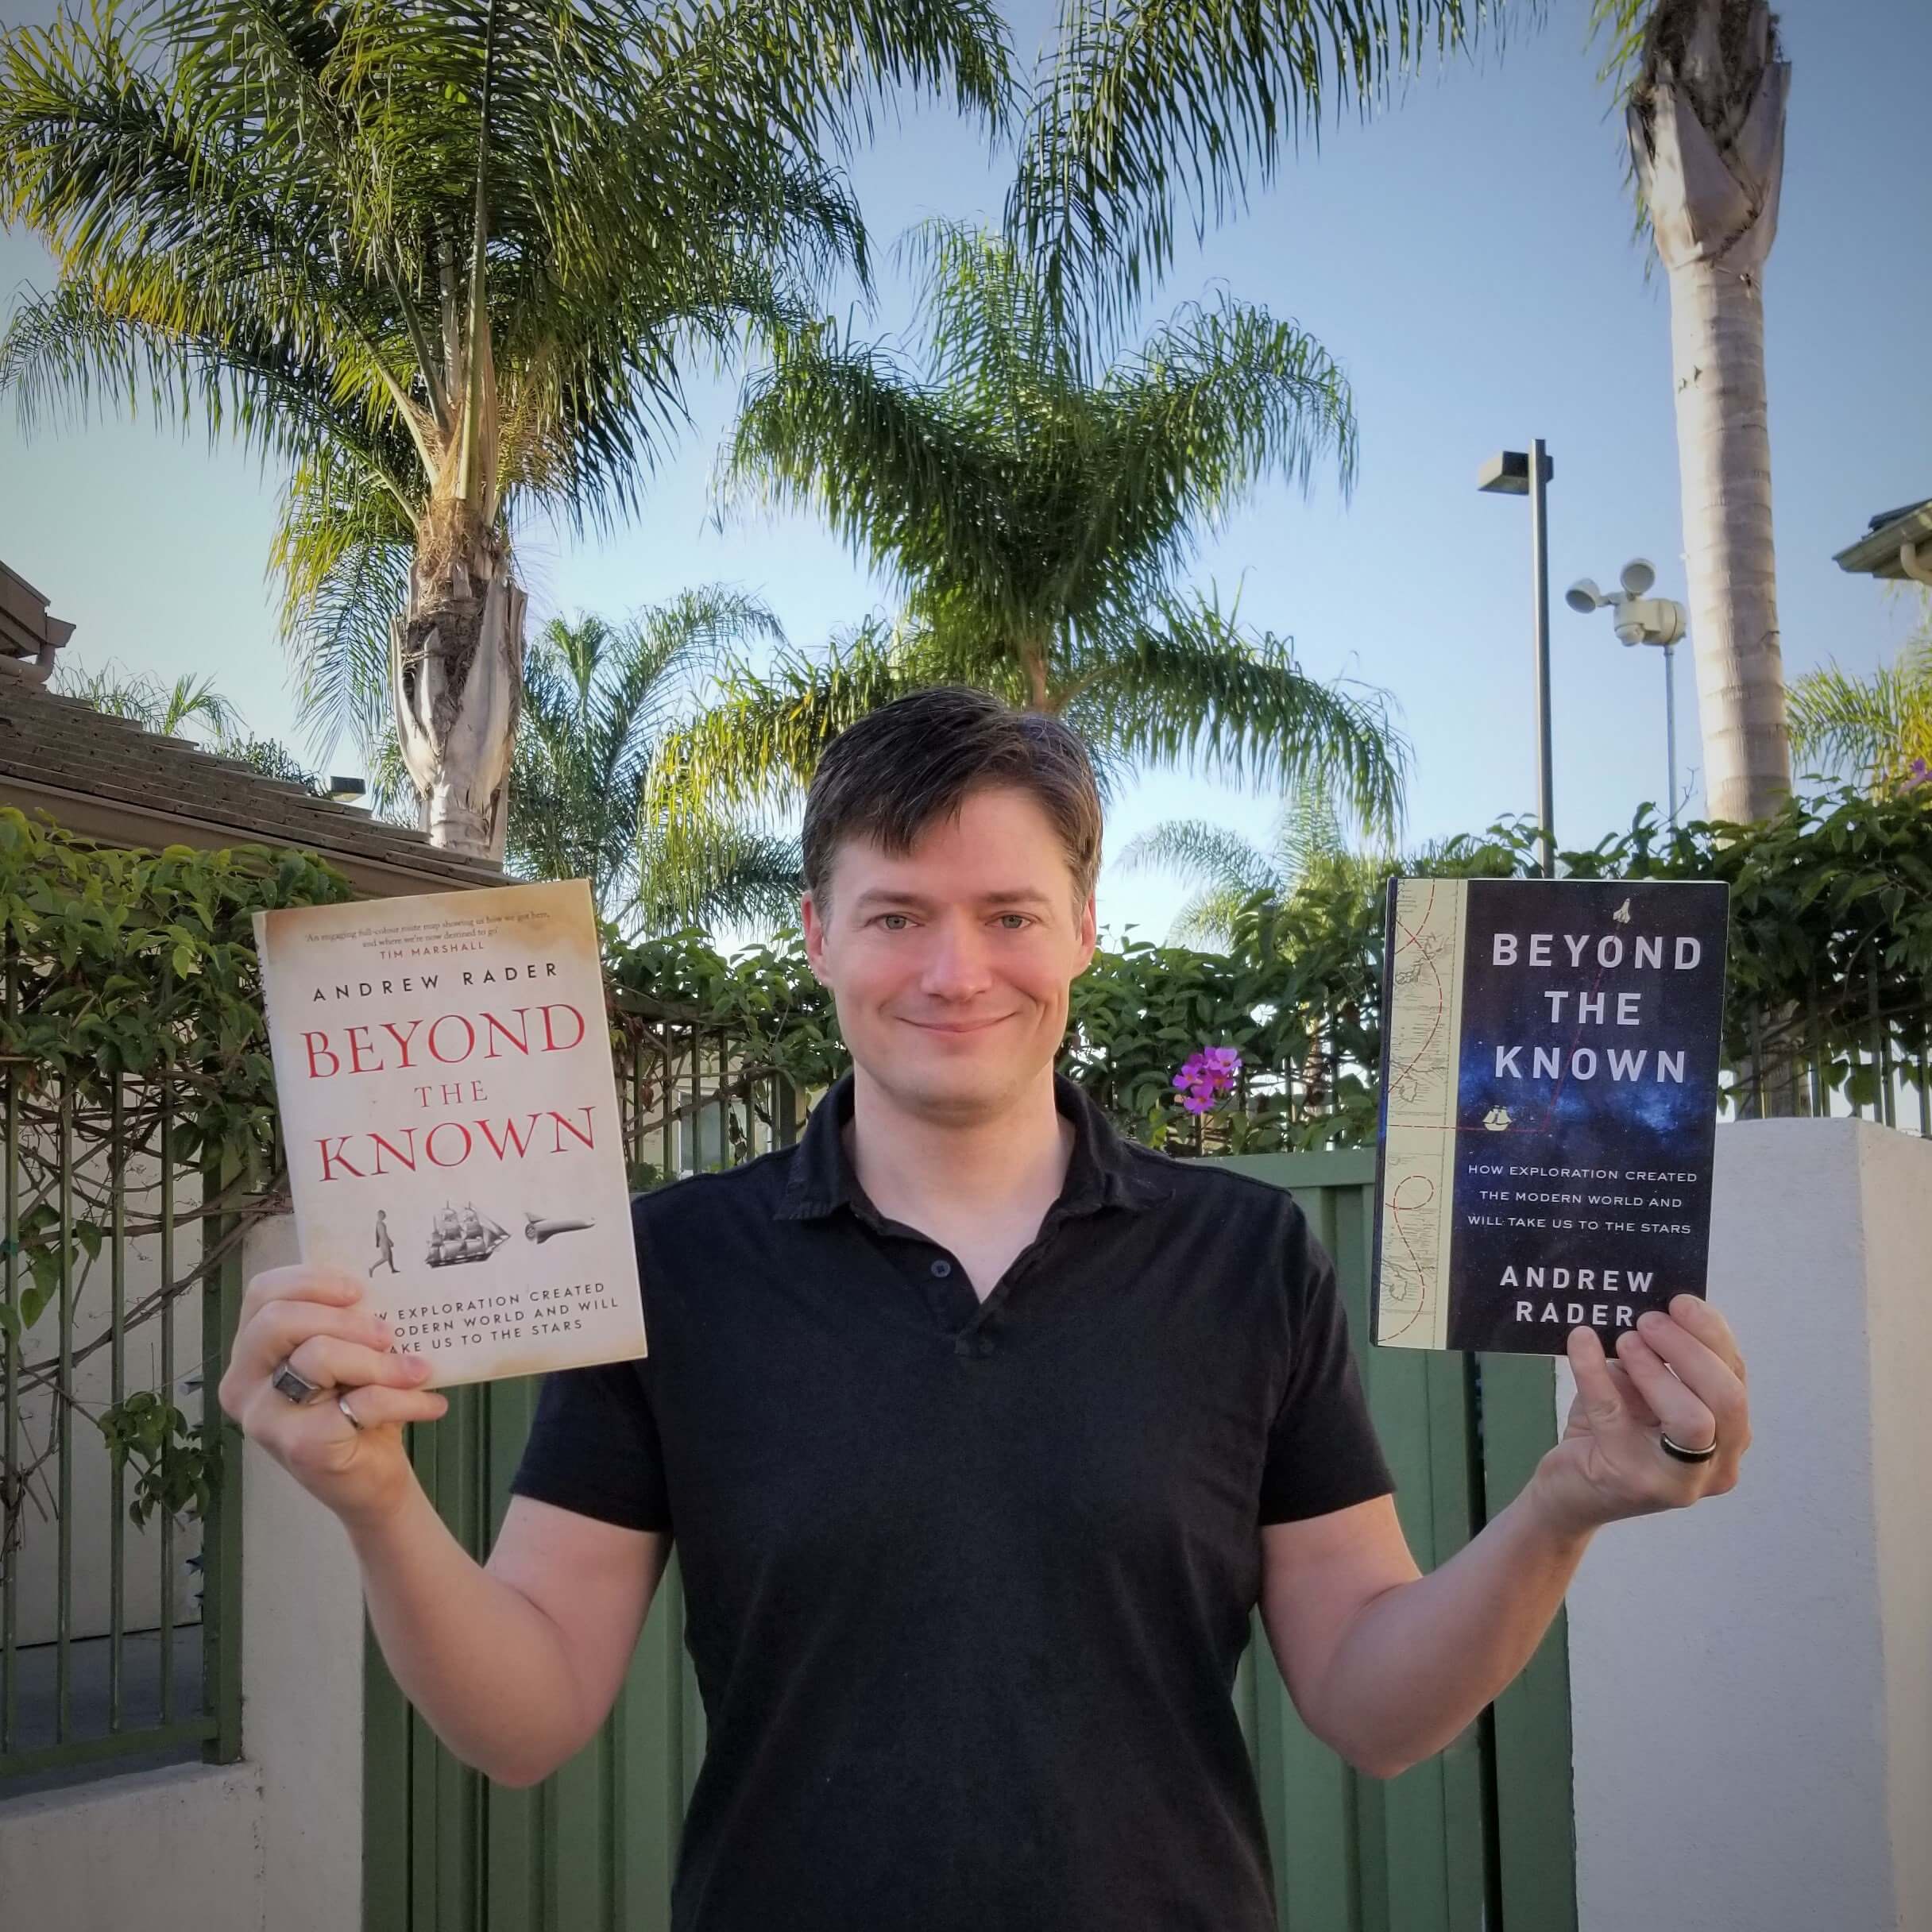 Andrew Rader with his book